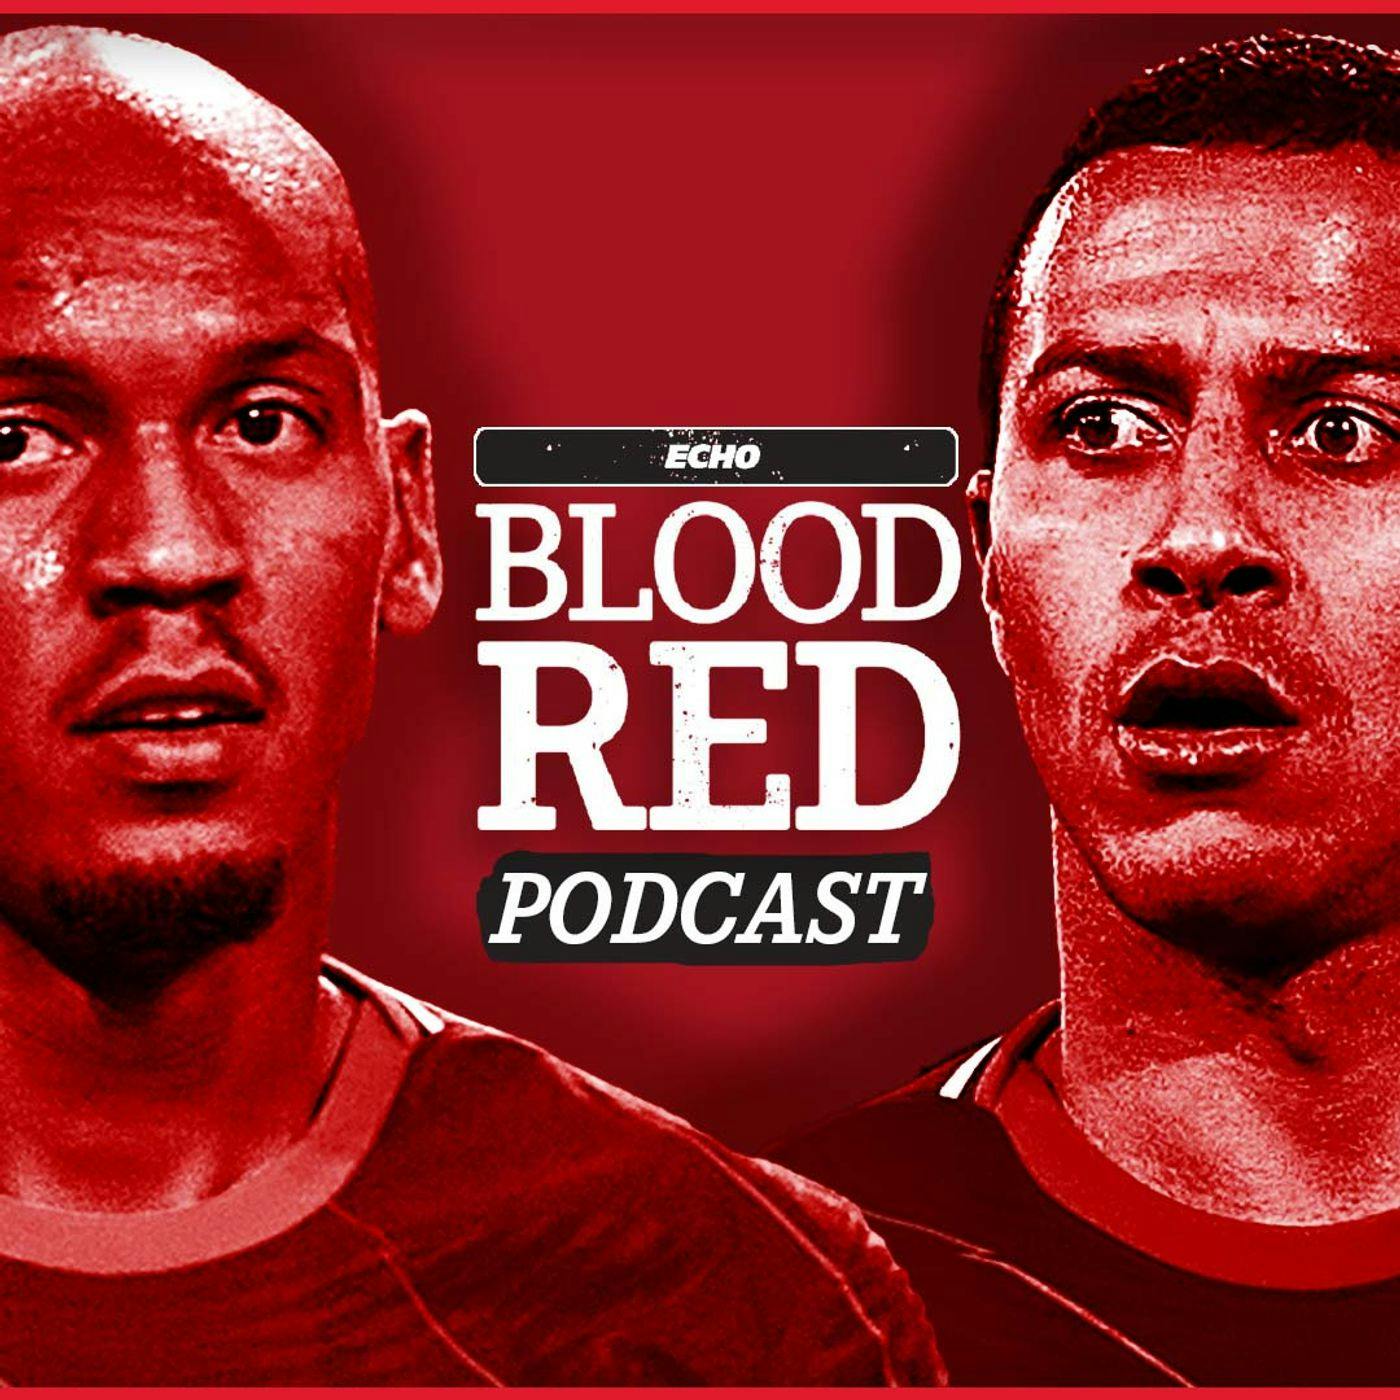 Blood Red Podcast: Liverpool midfield question looms for Klopp as upbeat Arsenal come to Anfield